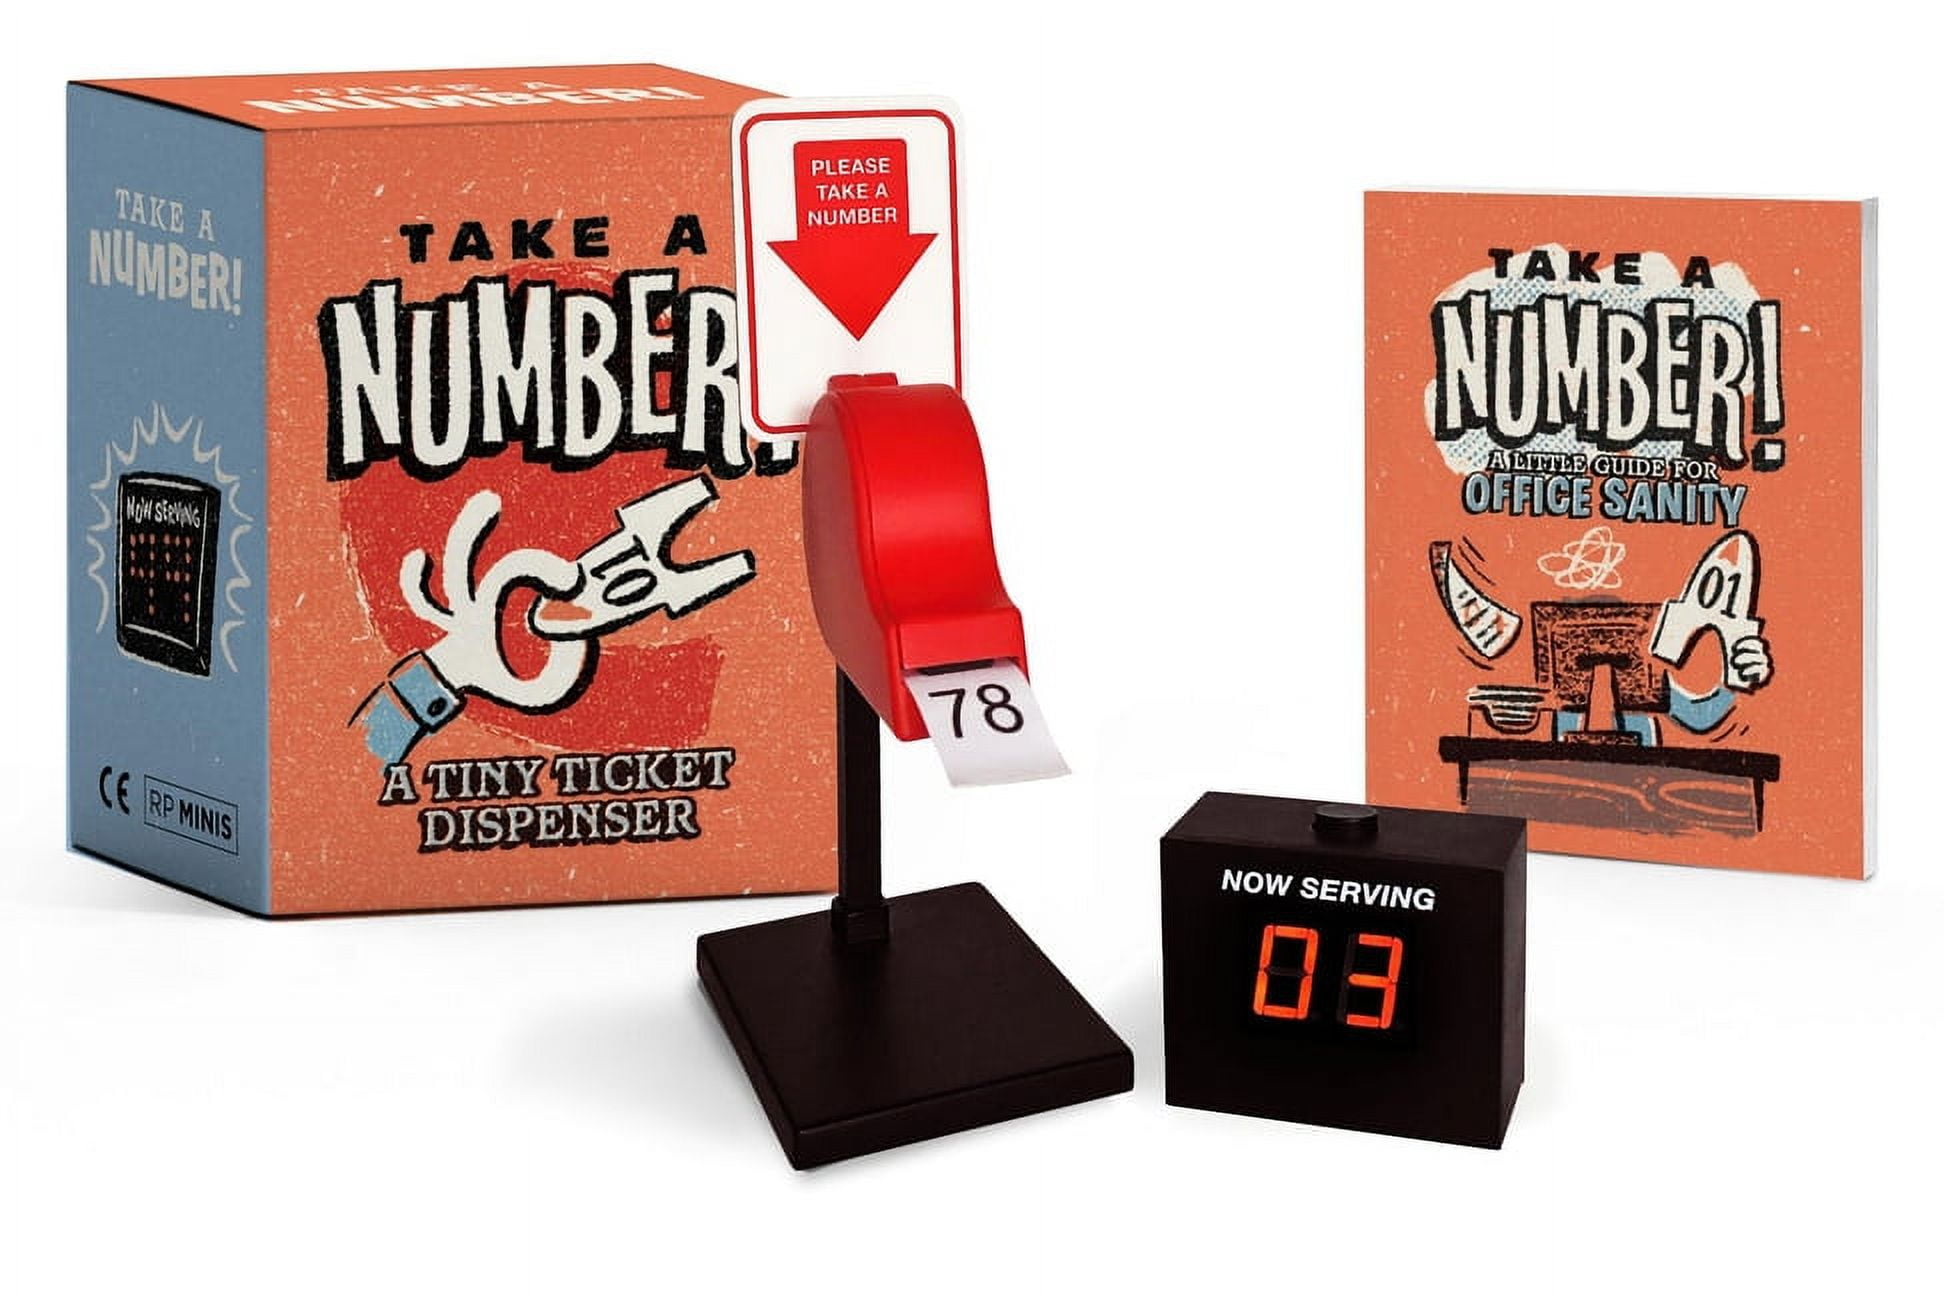 Take a Number!: A Tiny Ticket Dispenser [Book]